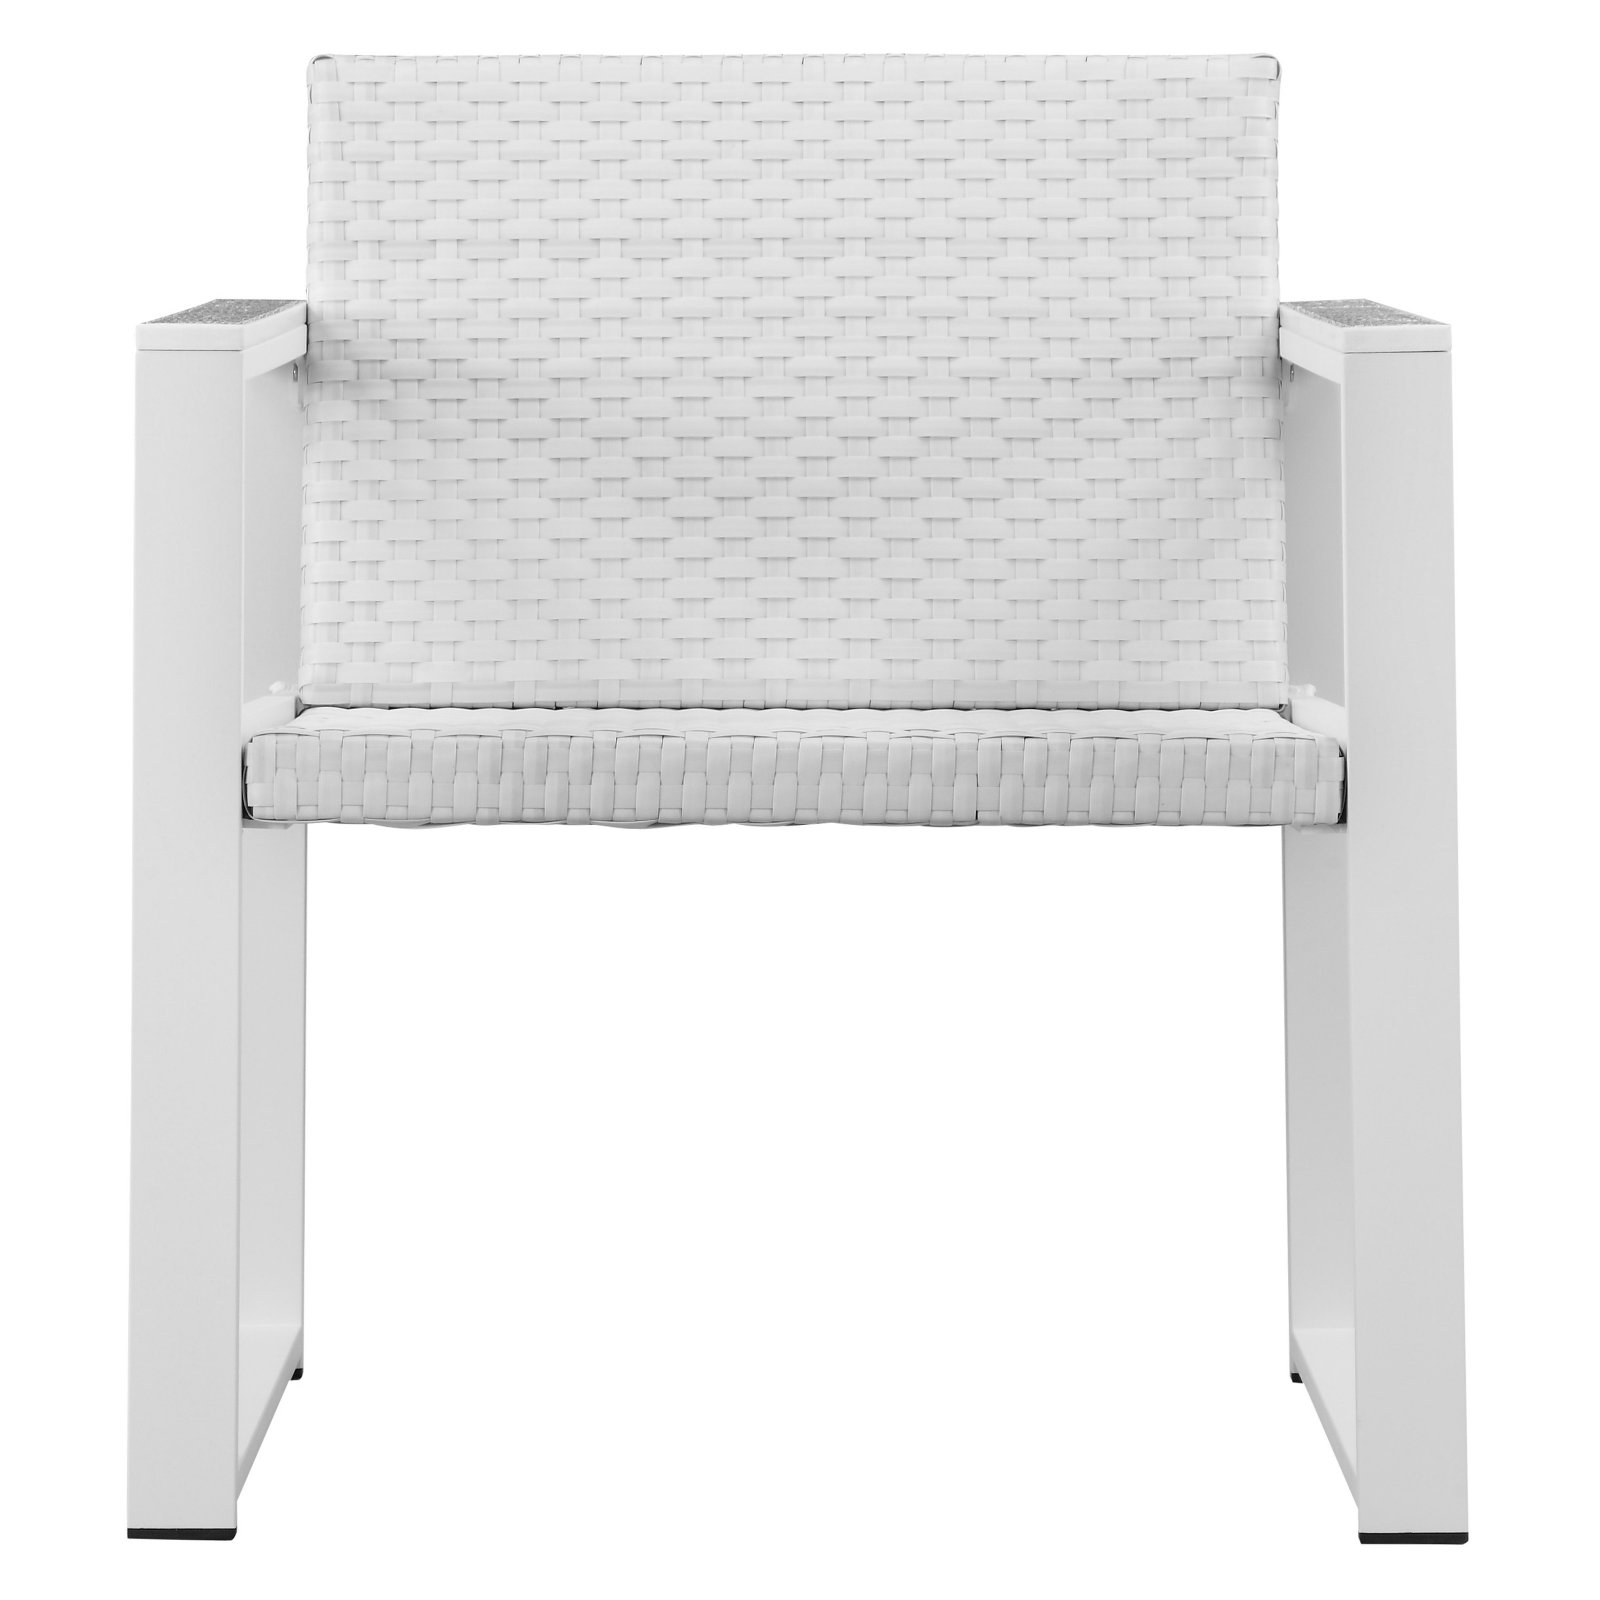 Pangea Home Chester Patio Lounge Chair - image 3 of 11